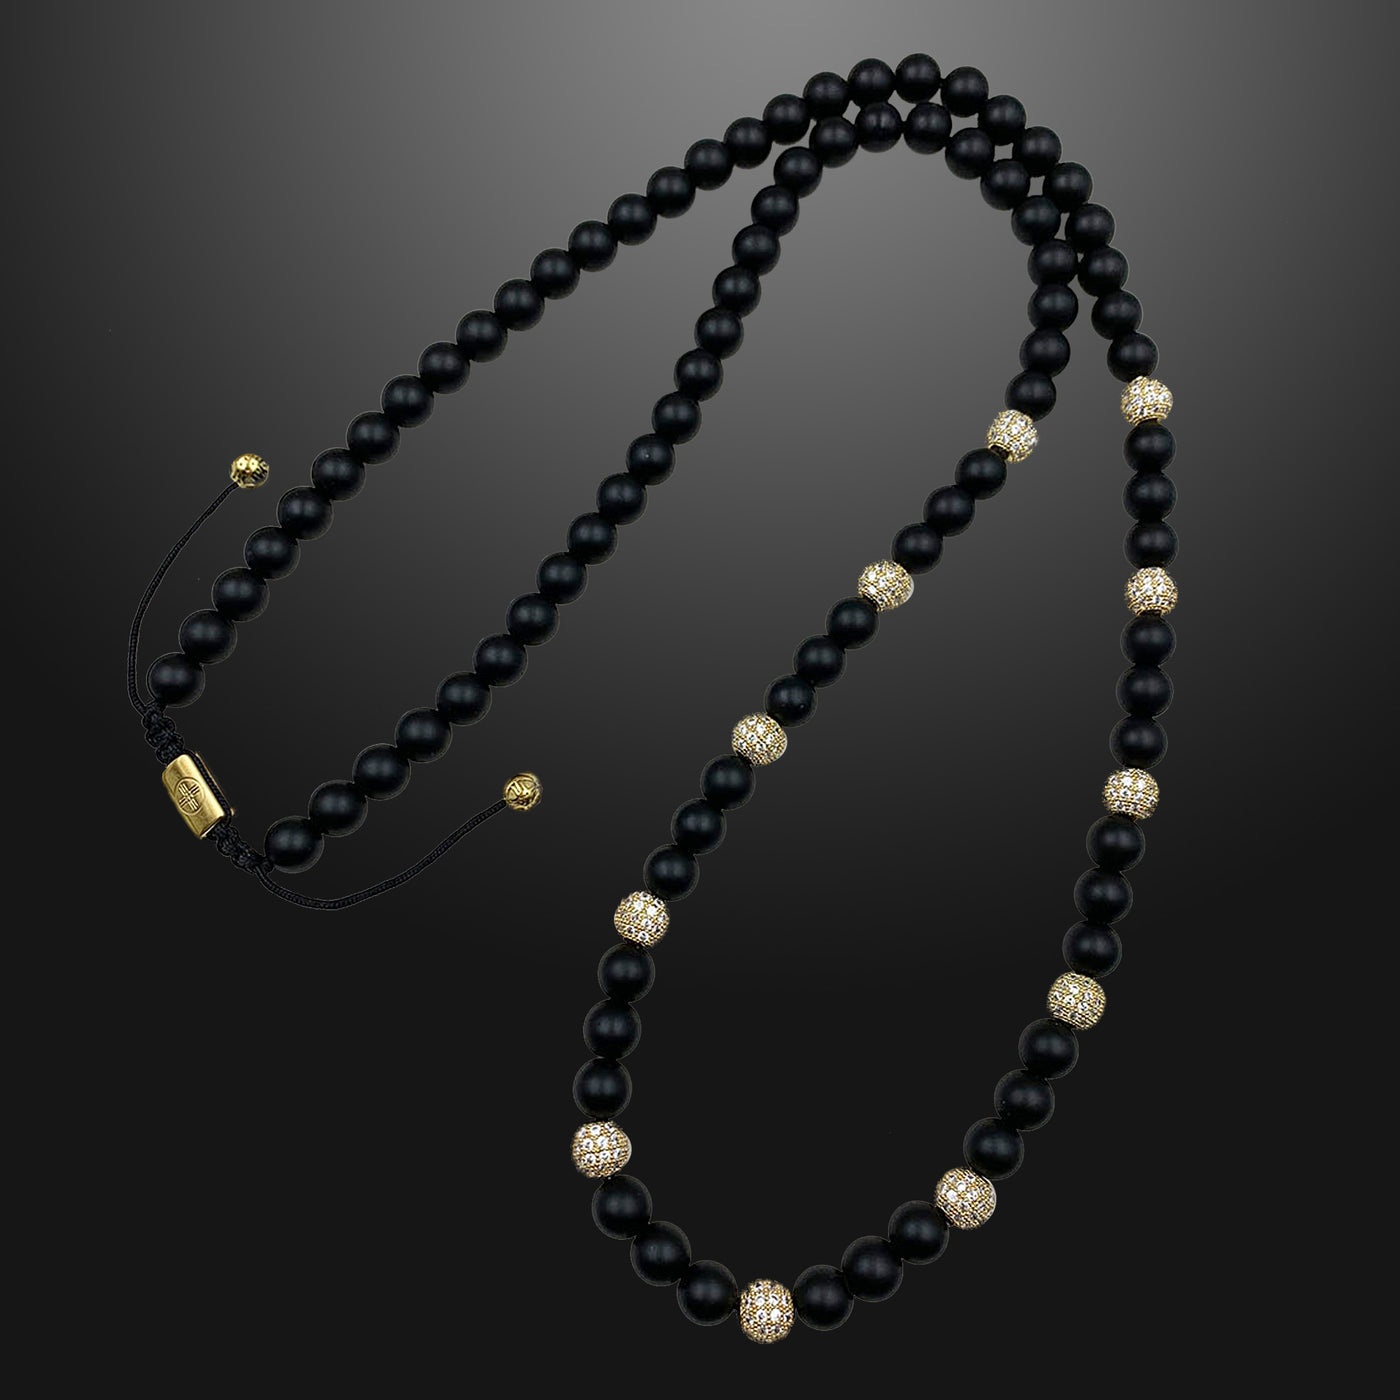 Royal Jewels Necklace with Black Agate and Pavé CZ Diamonds Beads